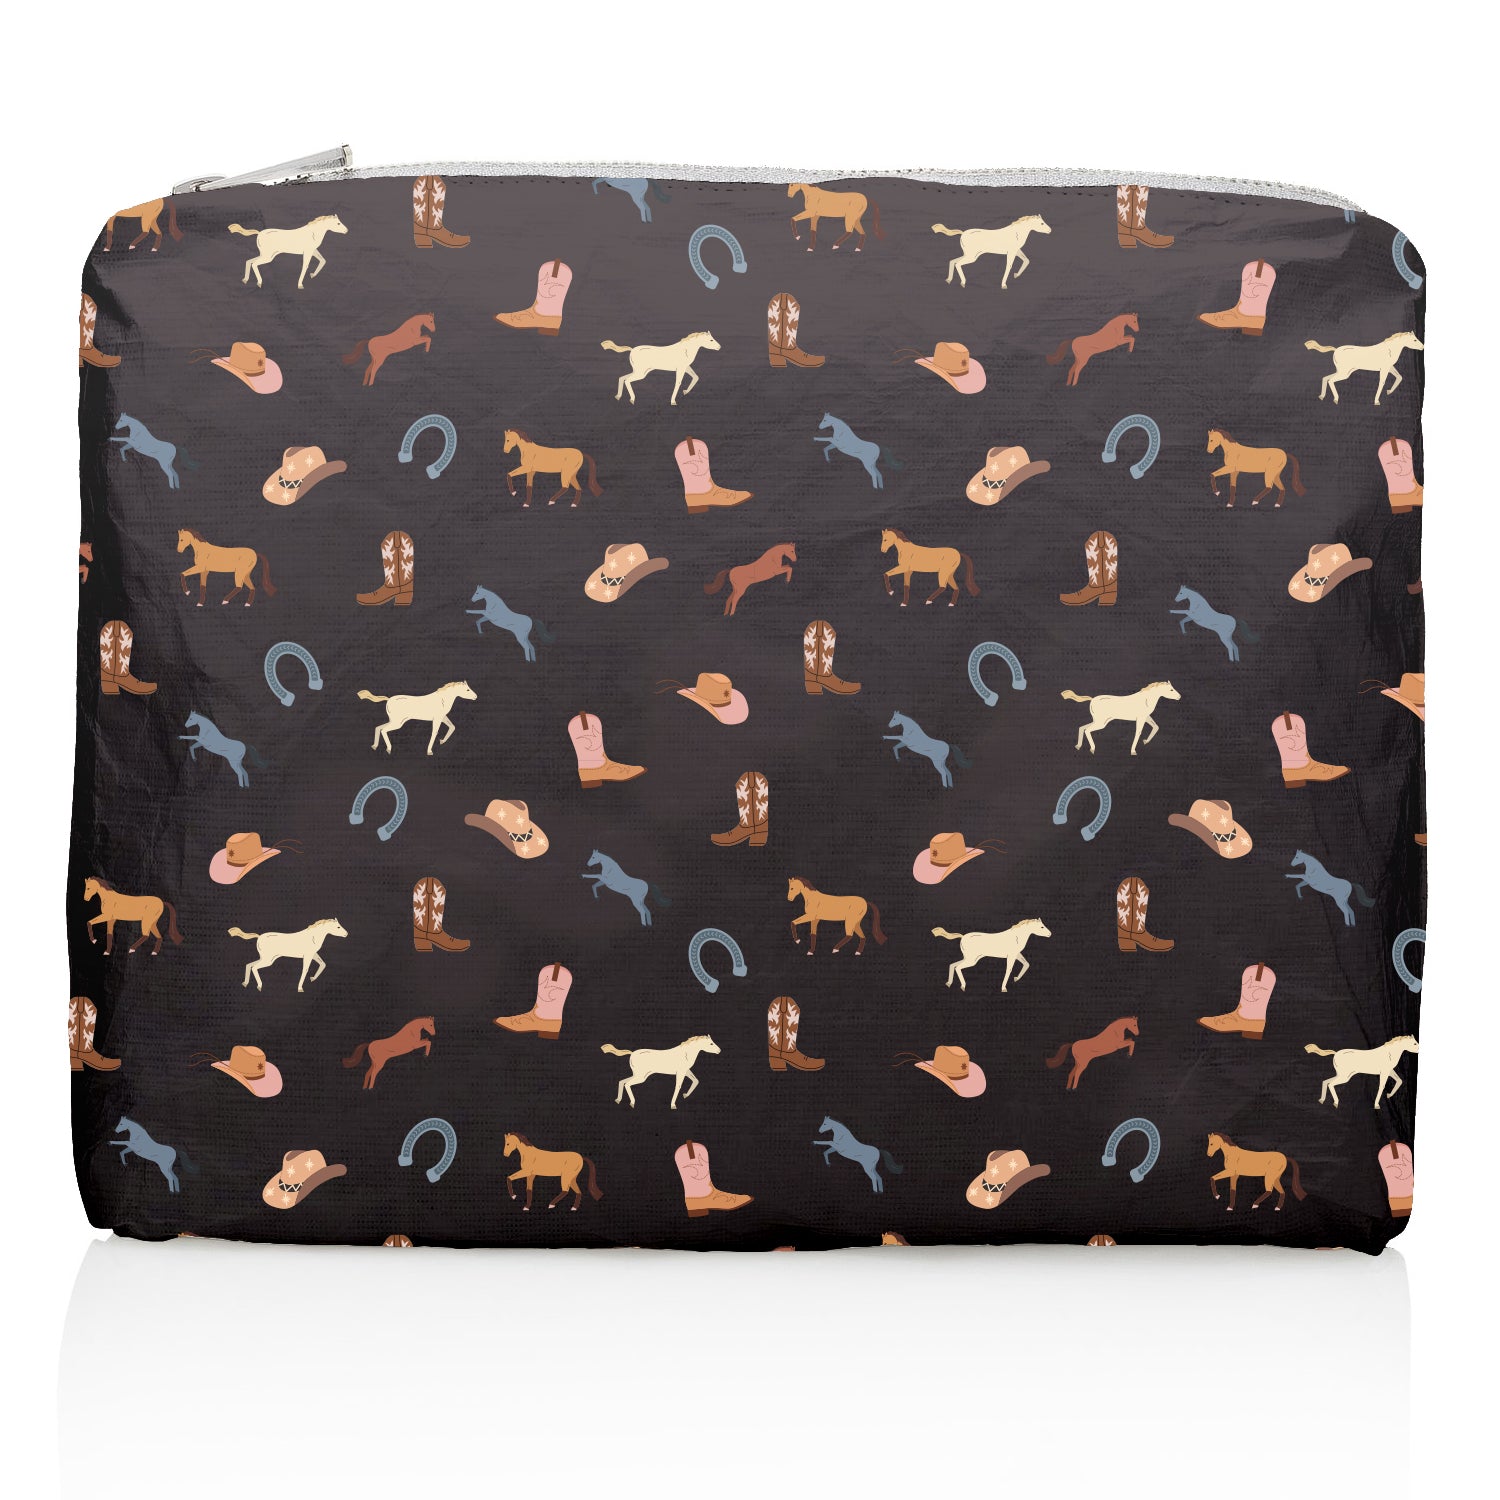 Black zipper pouch with horses, cowboy hats, boots and horsehoe pattern